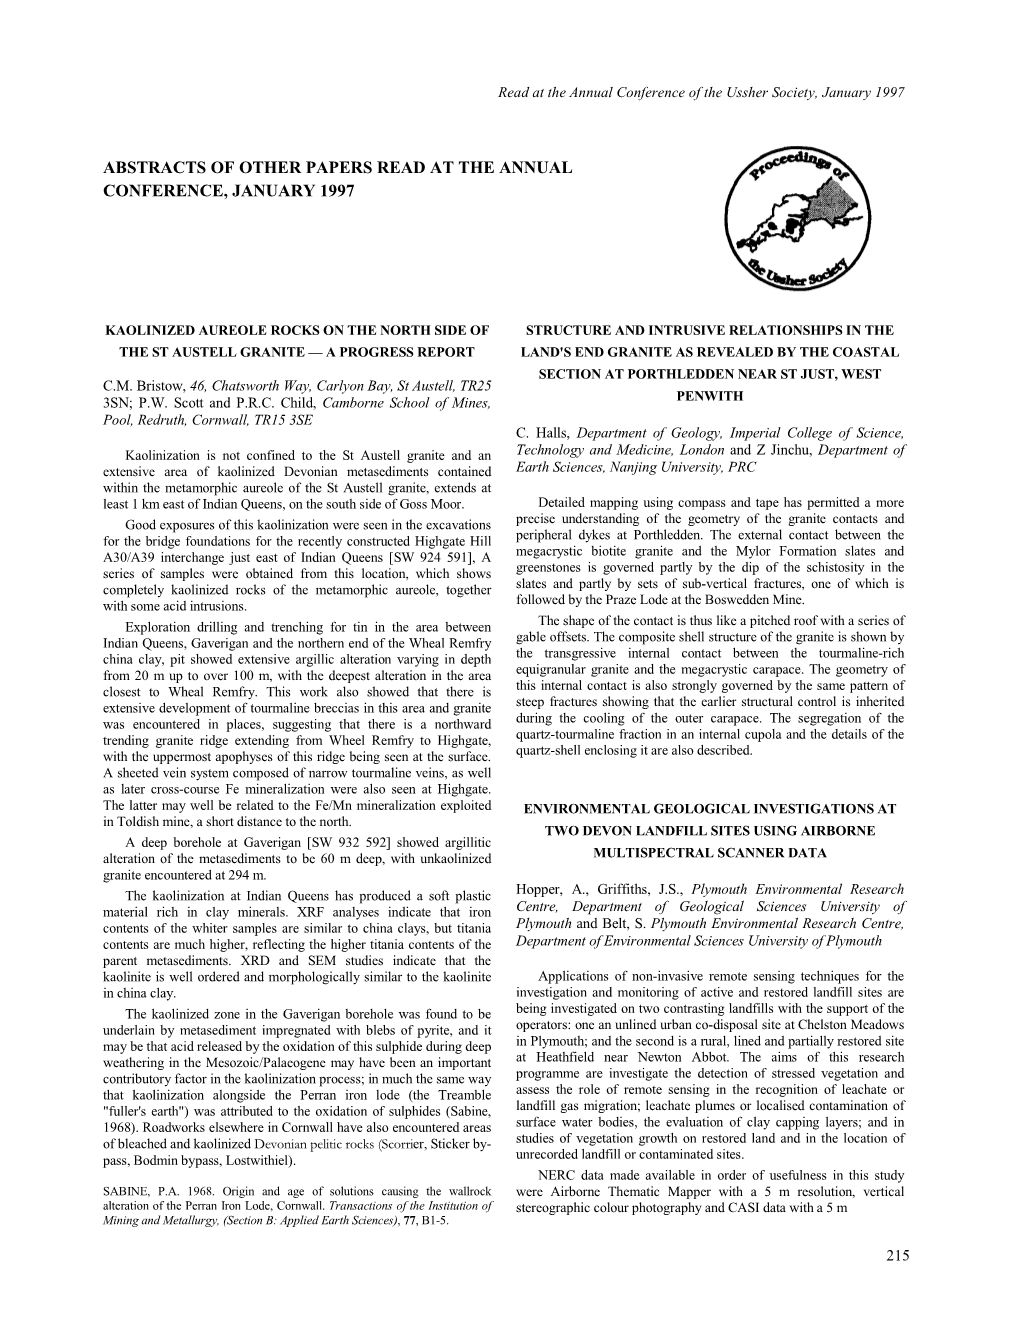 Abstracts of Other Papers Read at the Annual Conference, January 1997